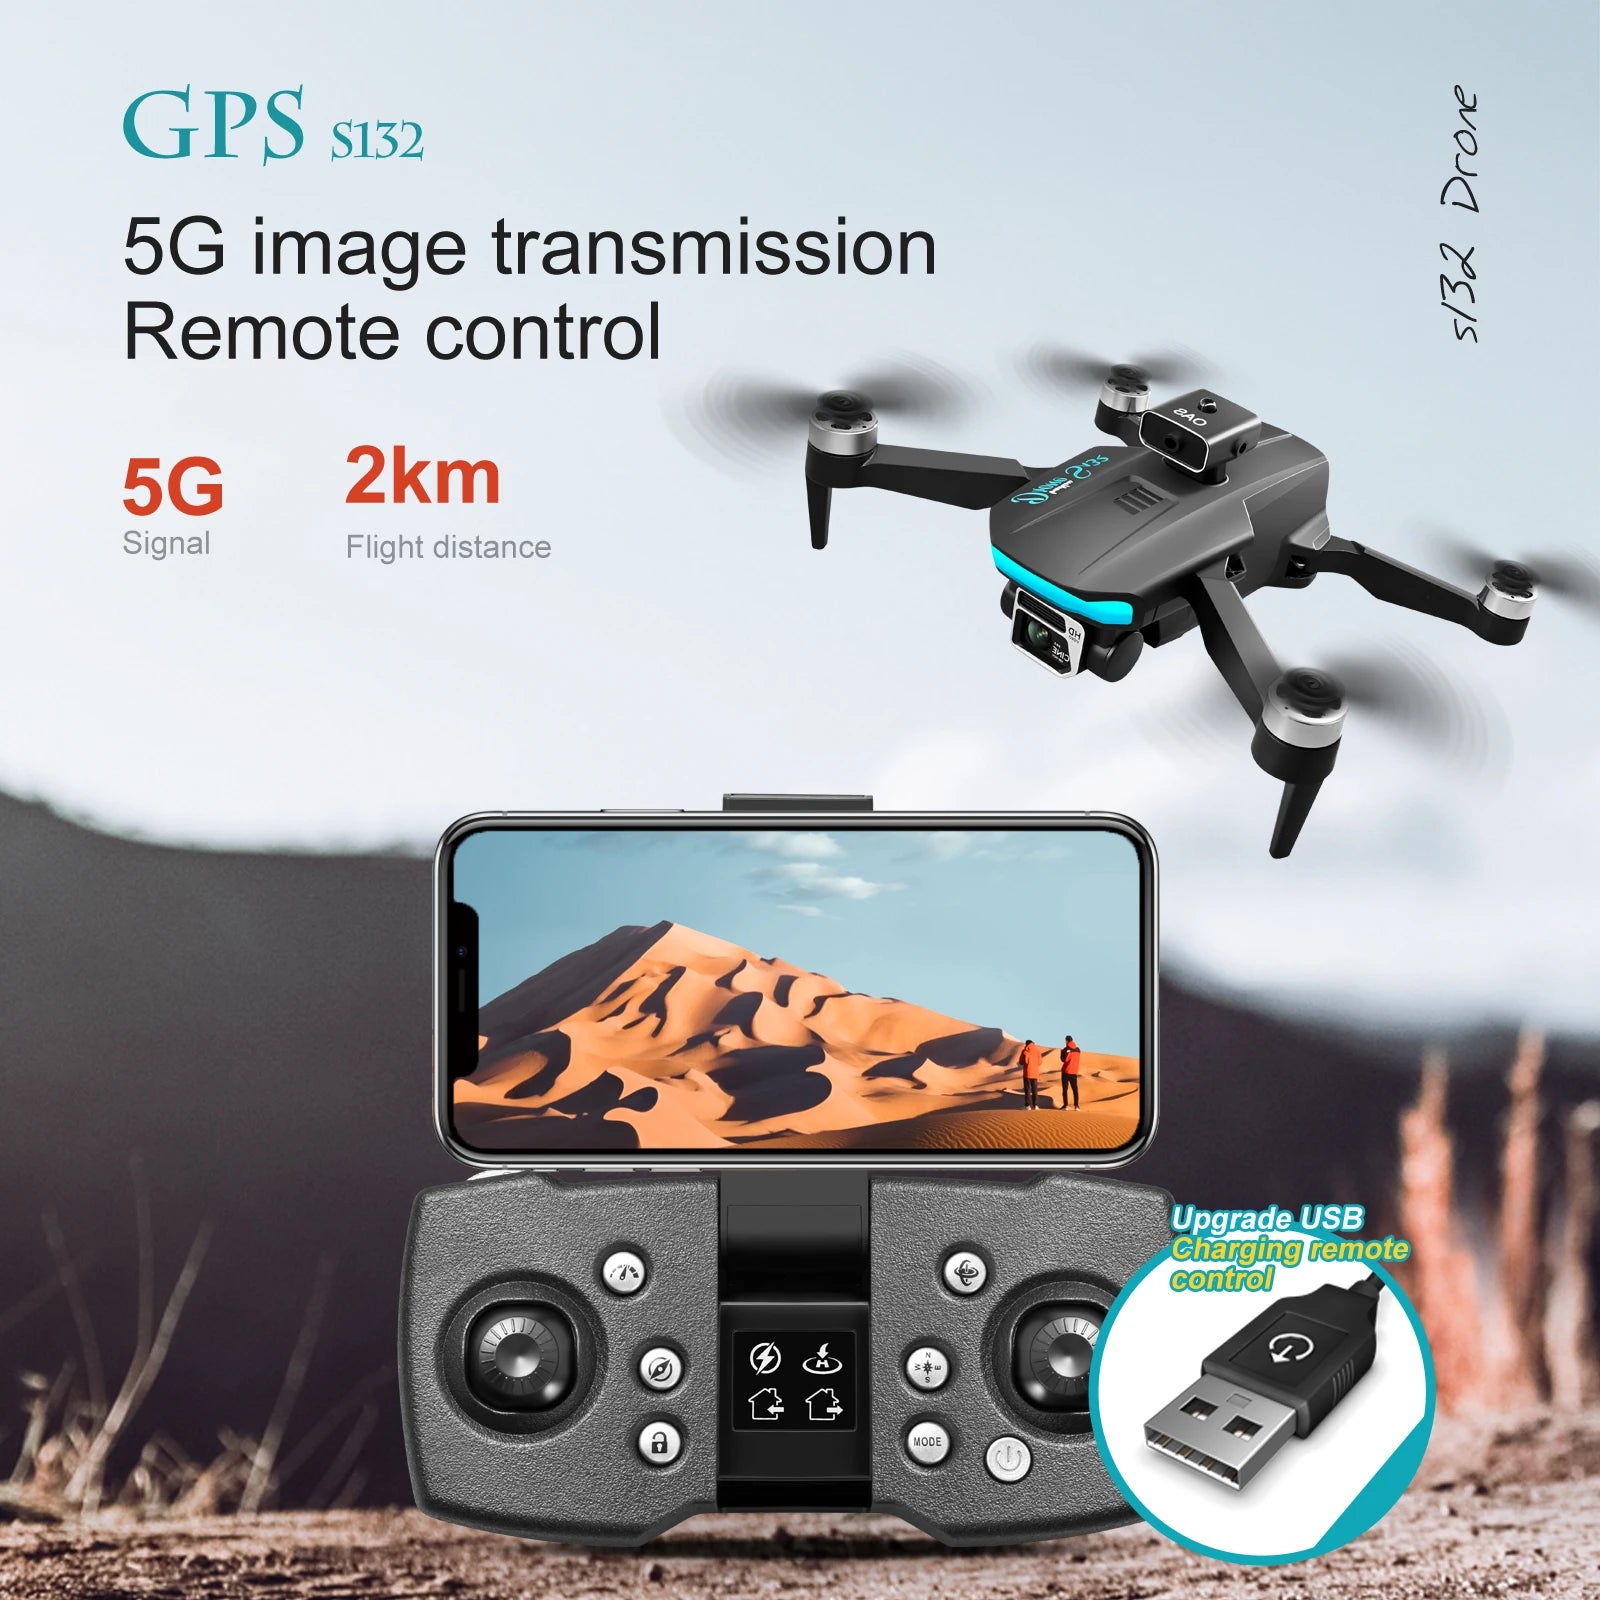 S132 Drone, gps s152 x 5g image transmission remote